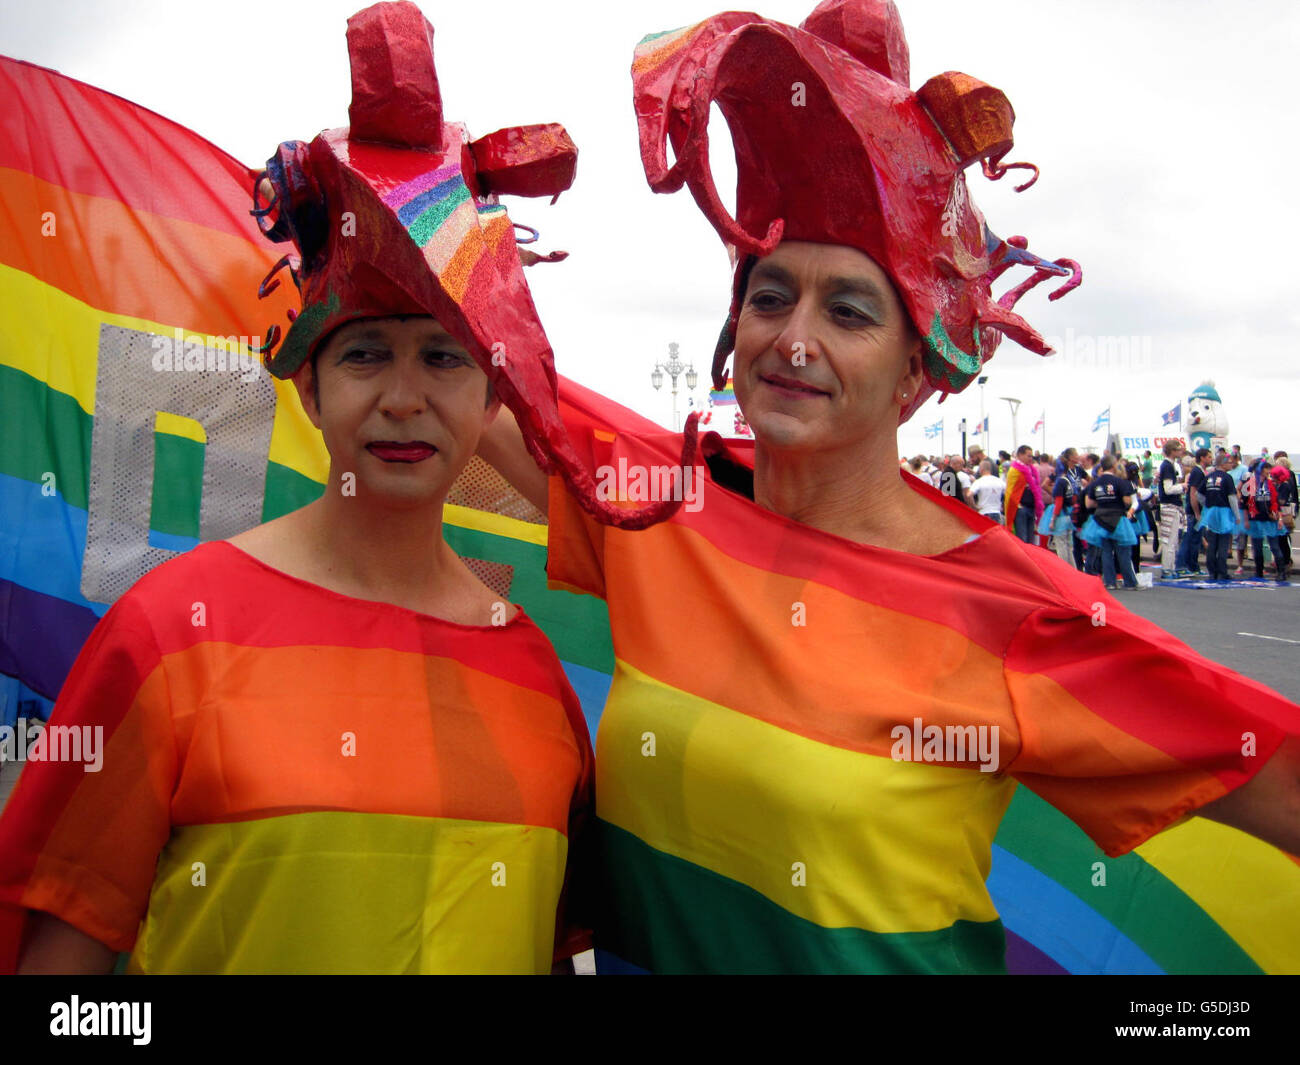 People take part in a parade, part of the Brighton Pride festival in Brighton, as the seaside city marked the 20th anniversary of its Pride celebrations today in typically flamboyant fashion as tens of thousands of people brought colour, noise and eccentricity to its streets. Stock Photo